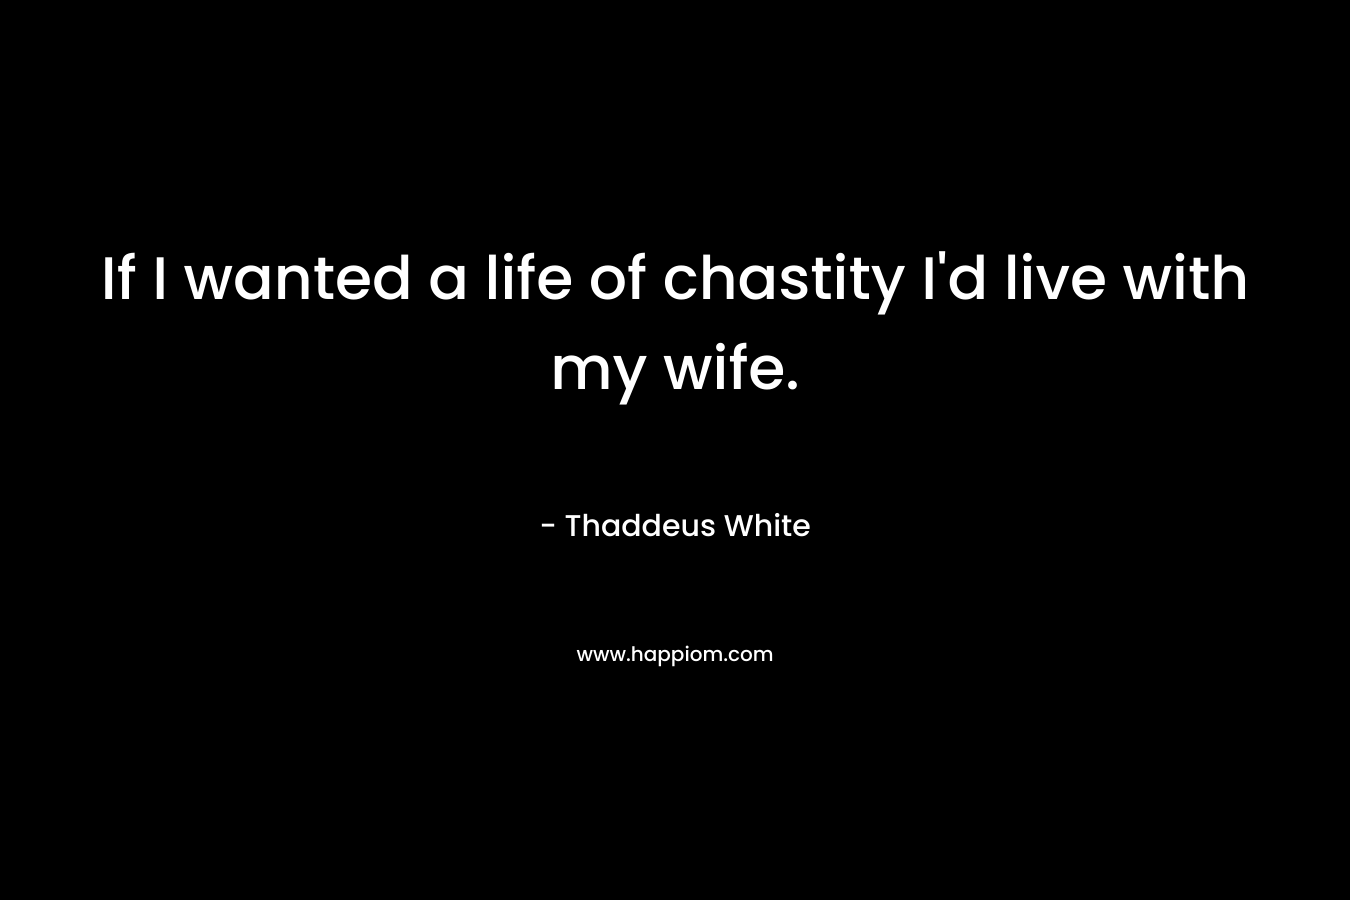 If I wanted a life of chastity I’d live with my wife. – Thaddeus White